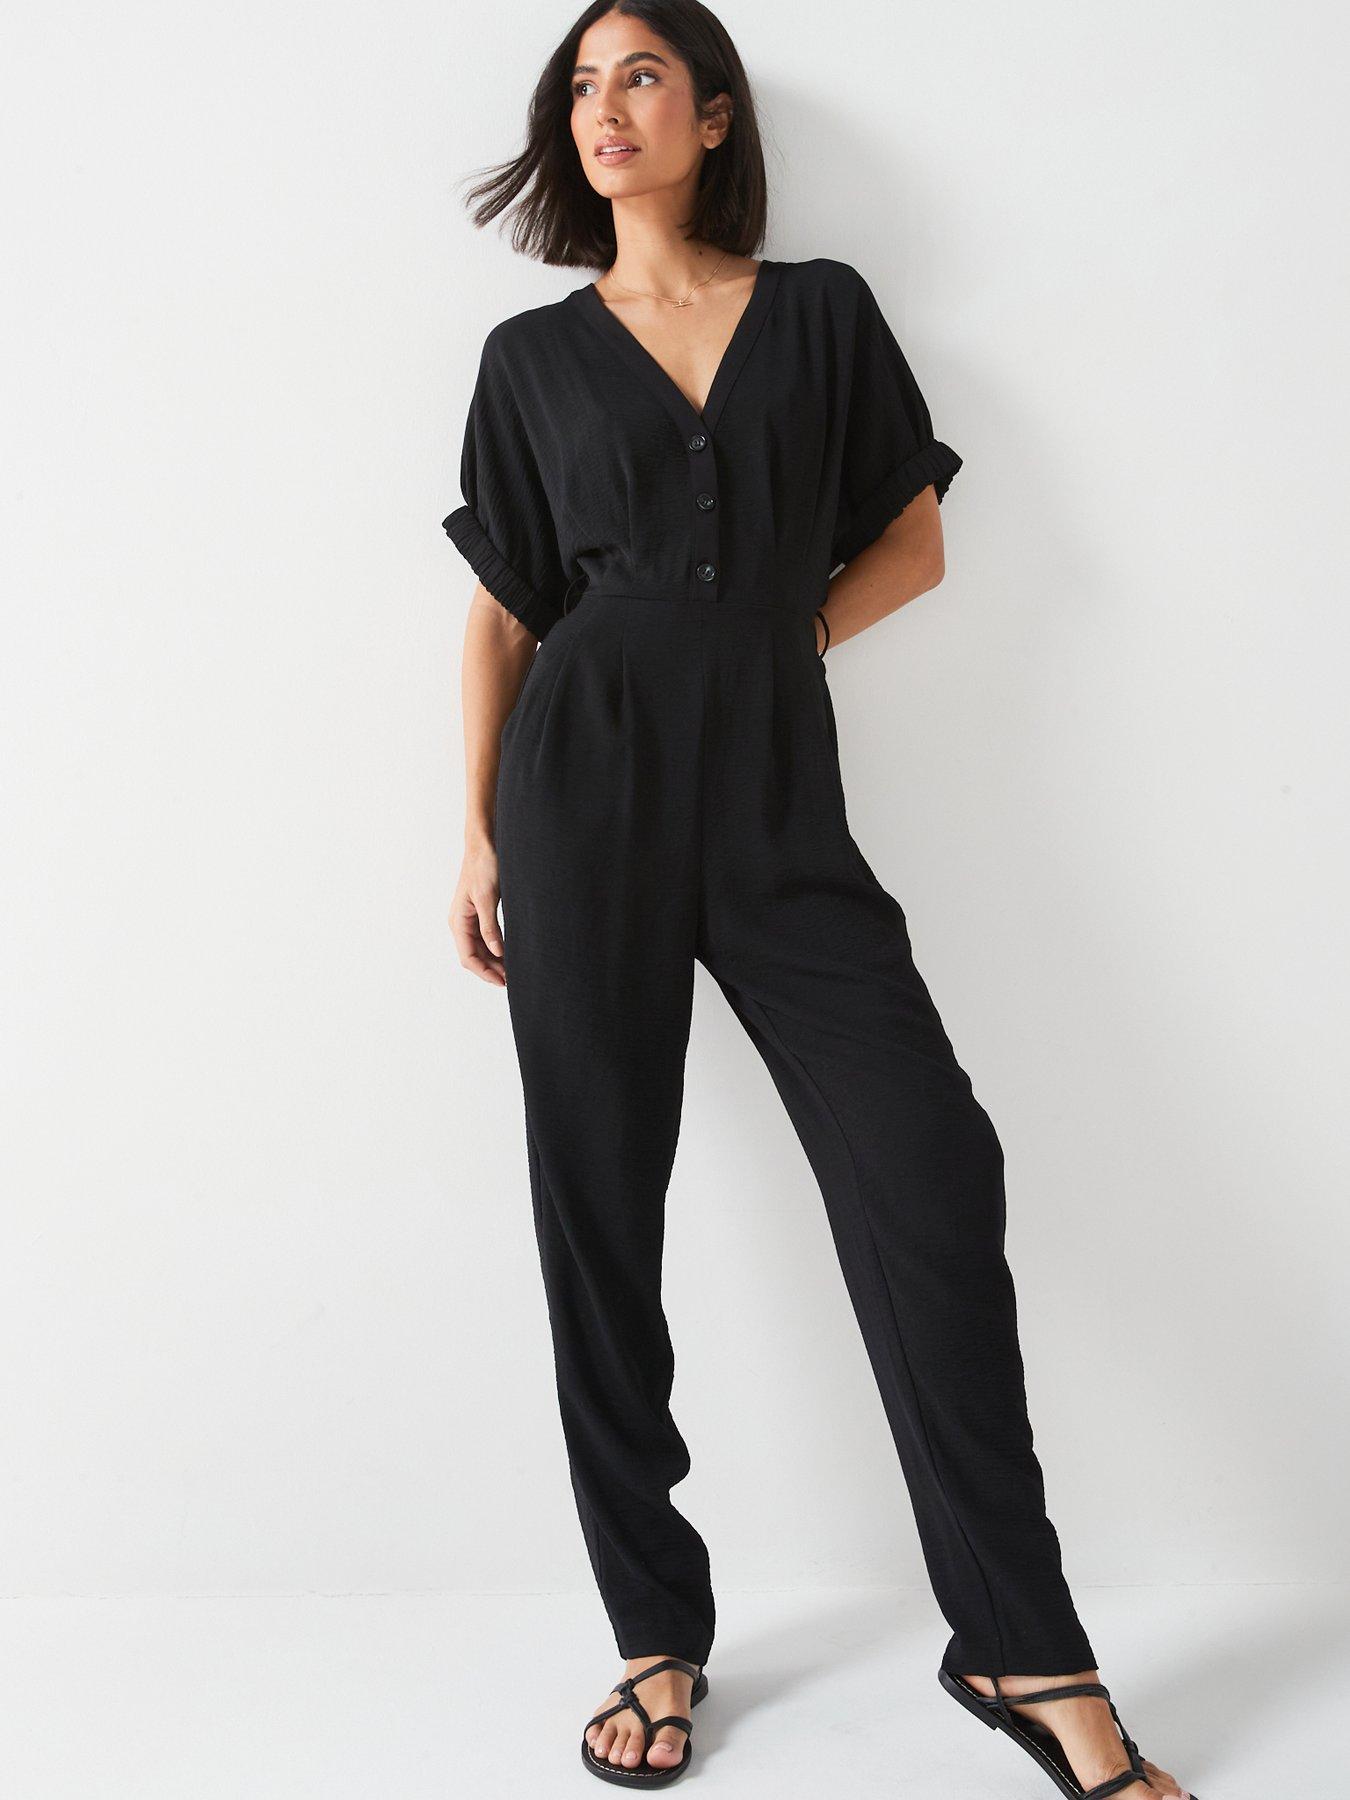 V by very | Playsuits & jumpsuits | Women | Very Ireland